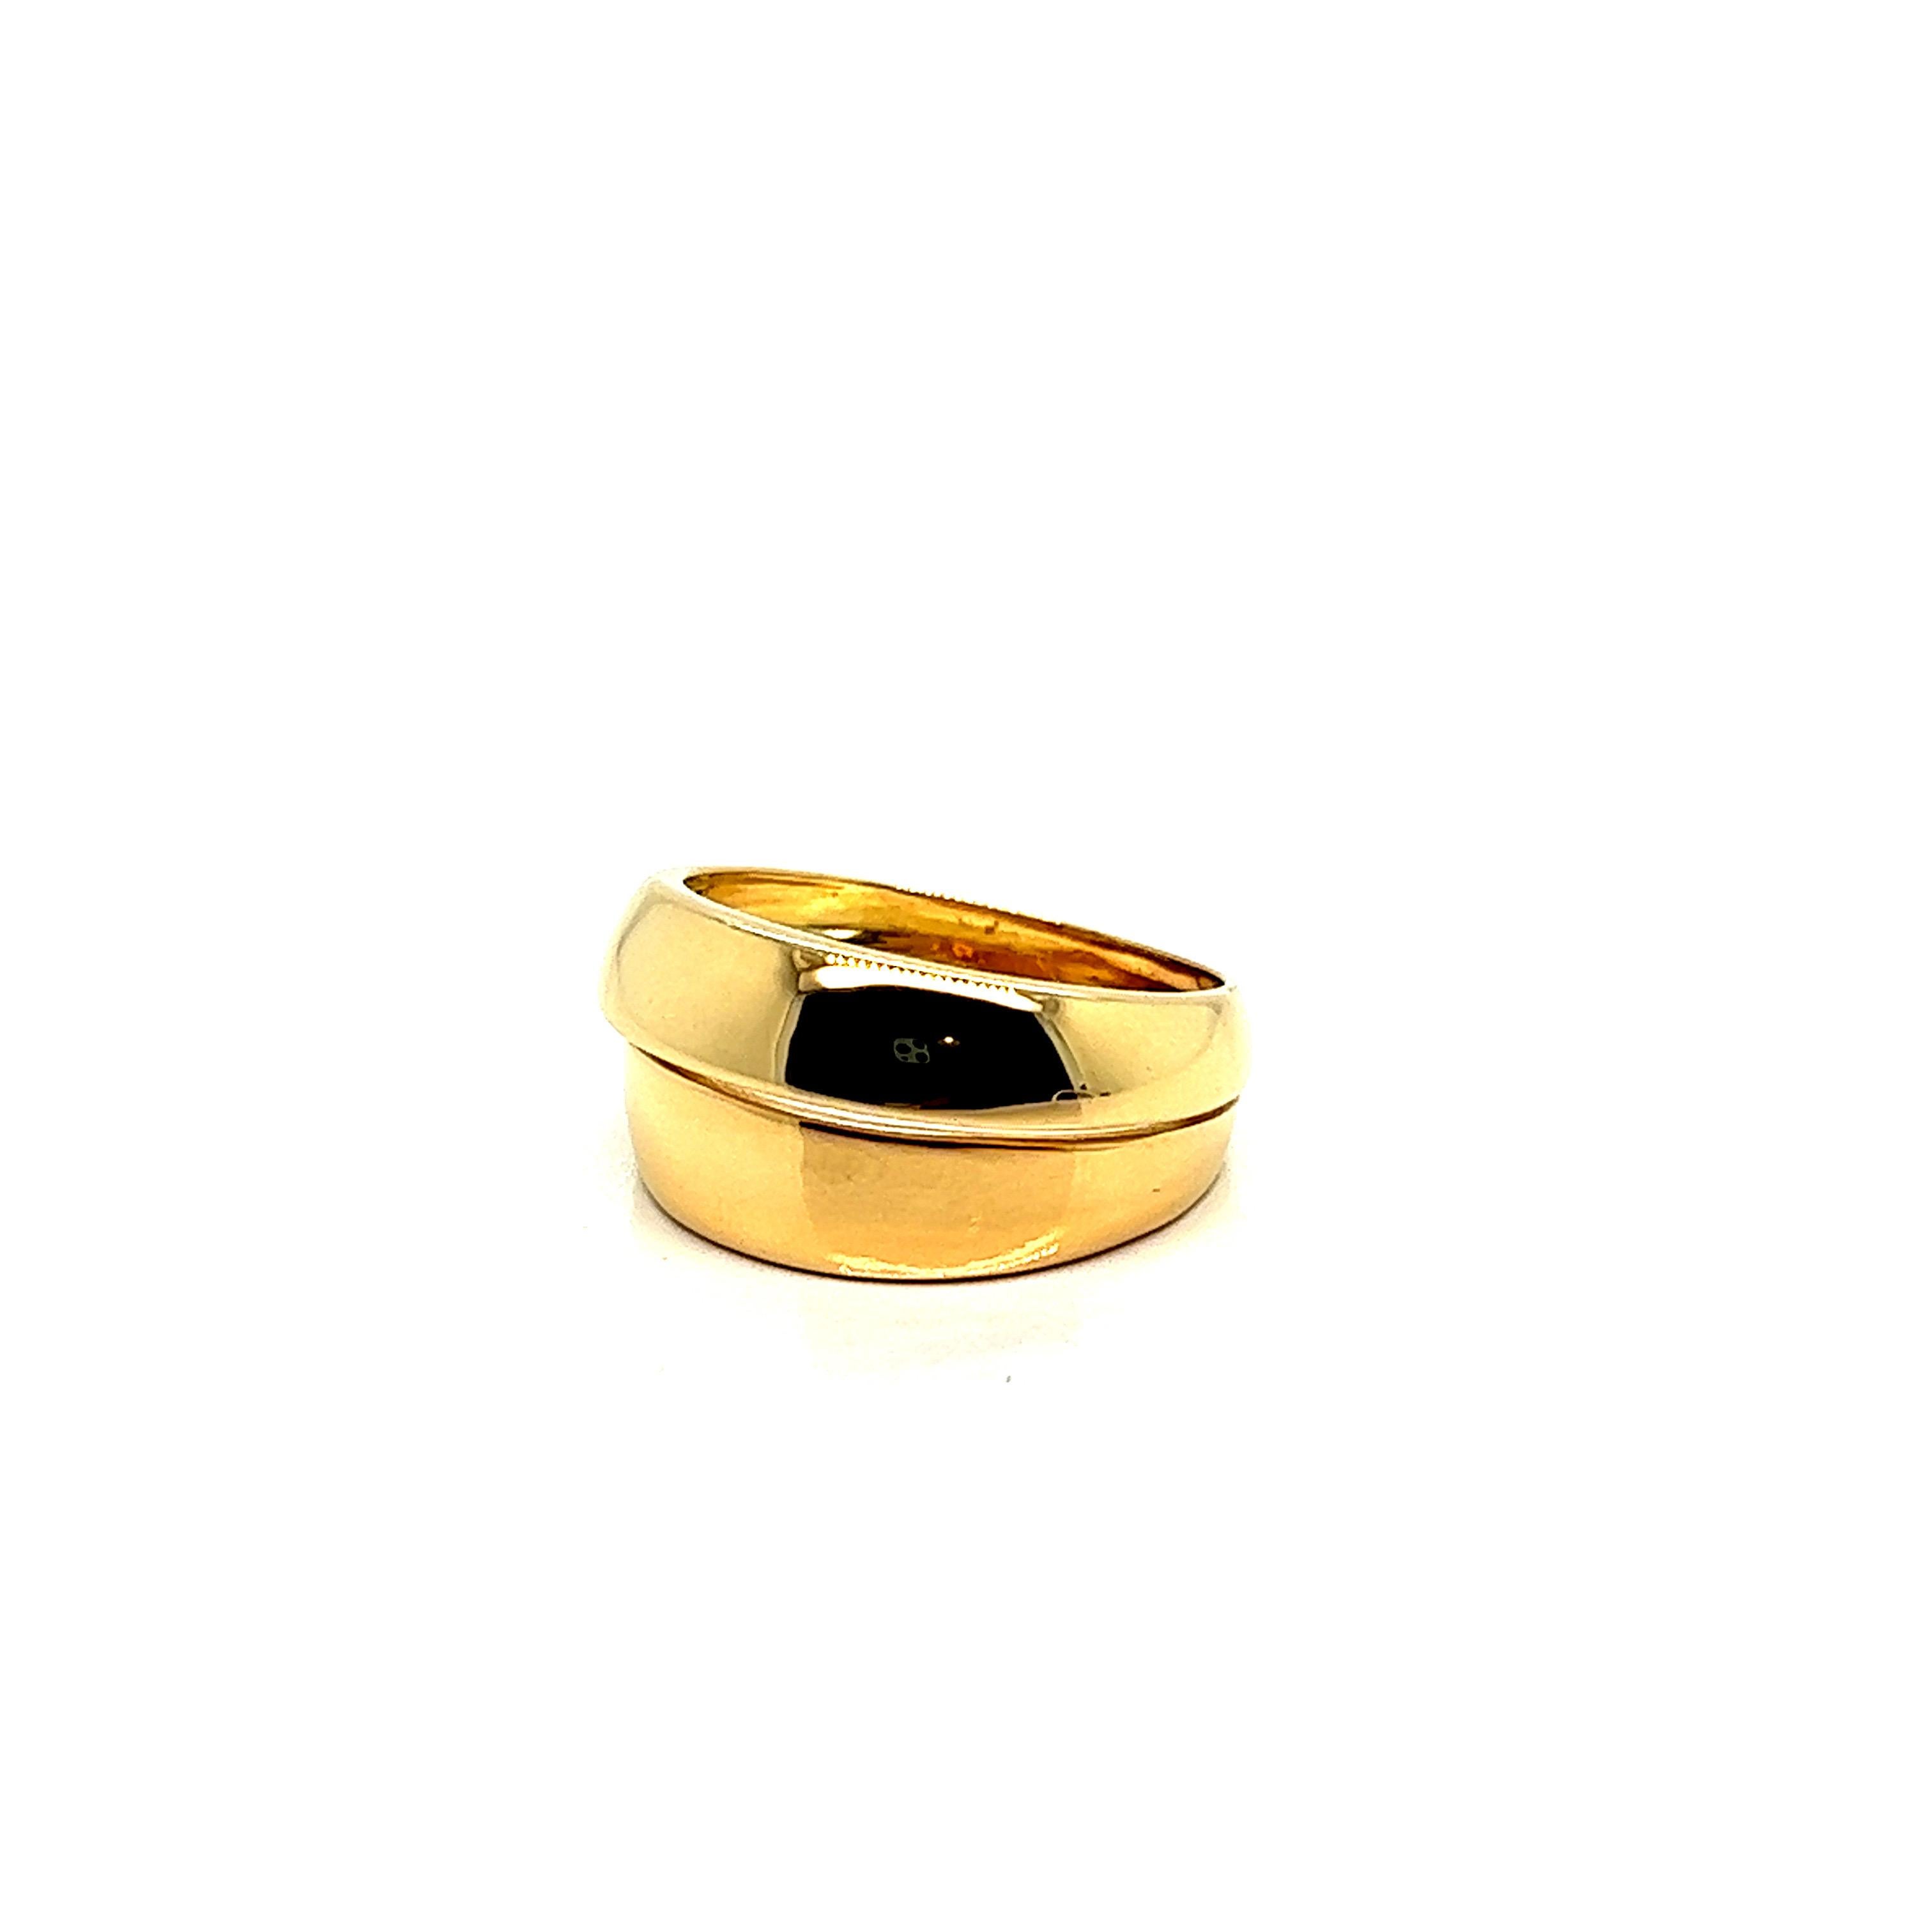 French Ring with Middle Opening 18 Carat Yellow Gold 5